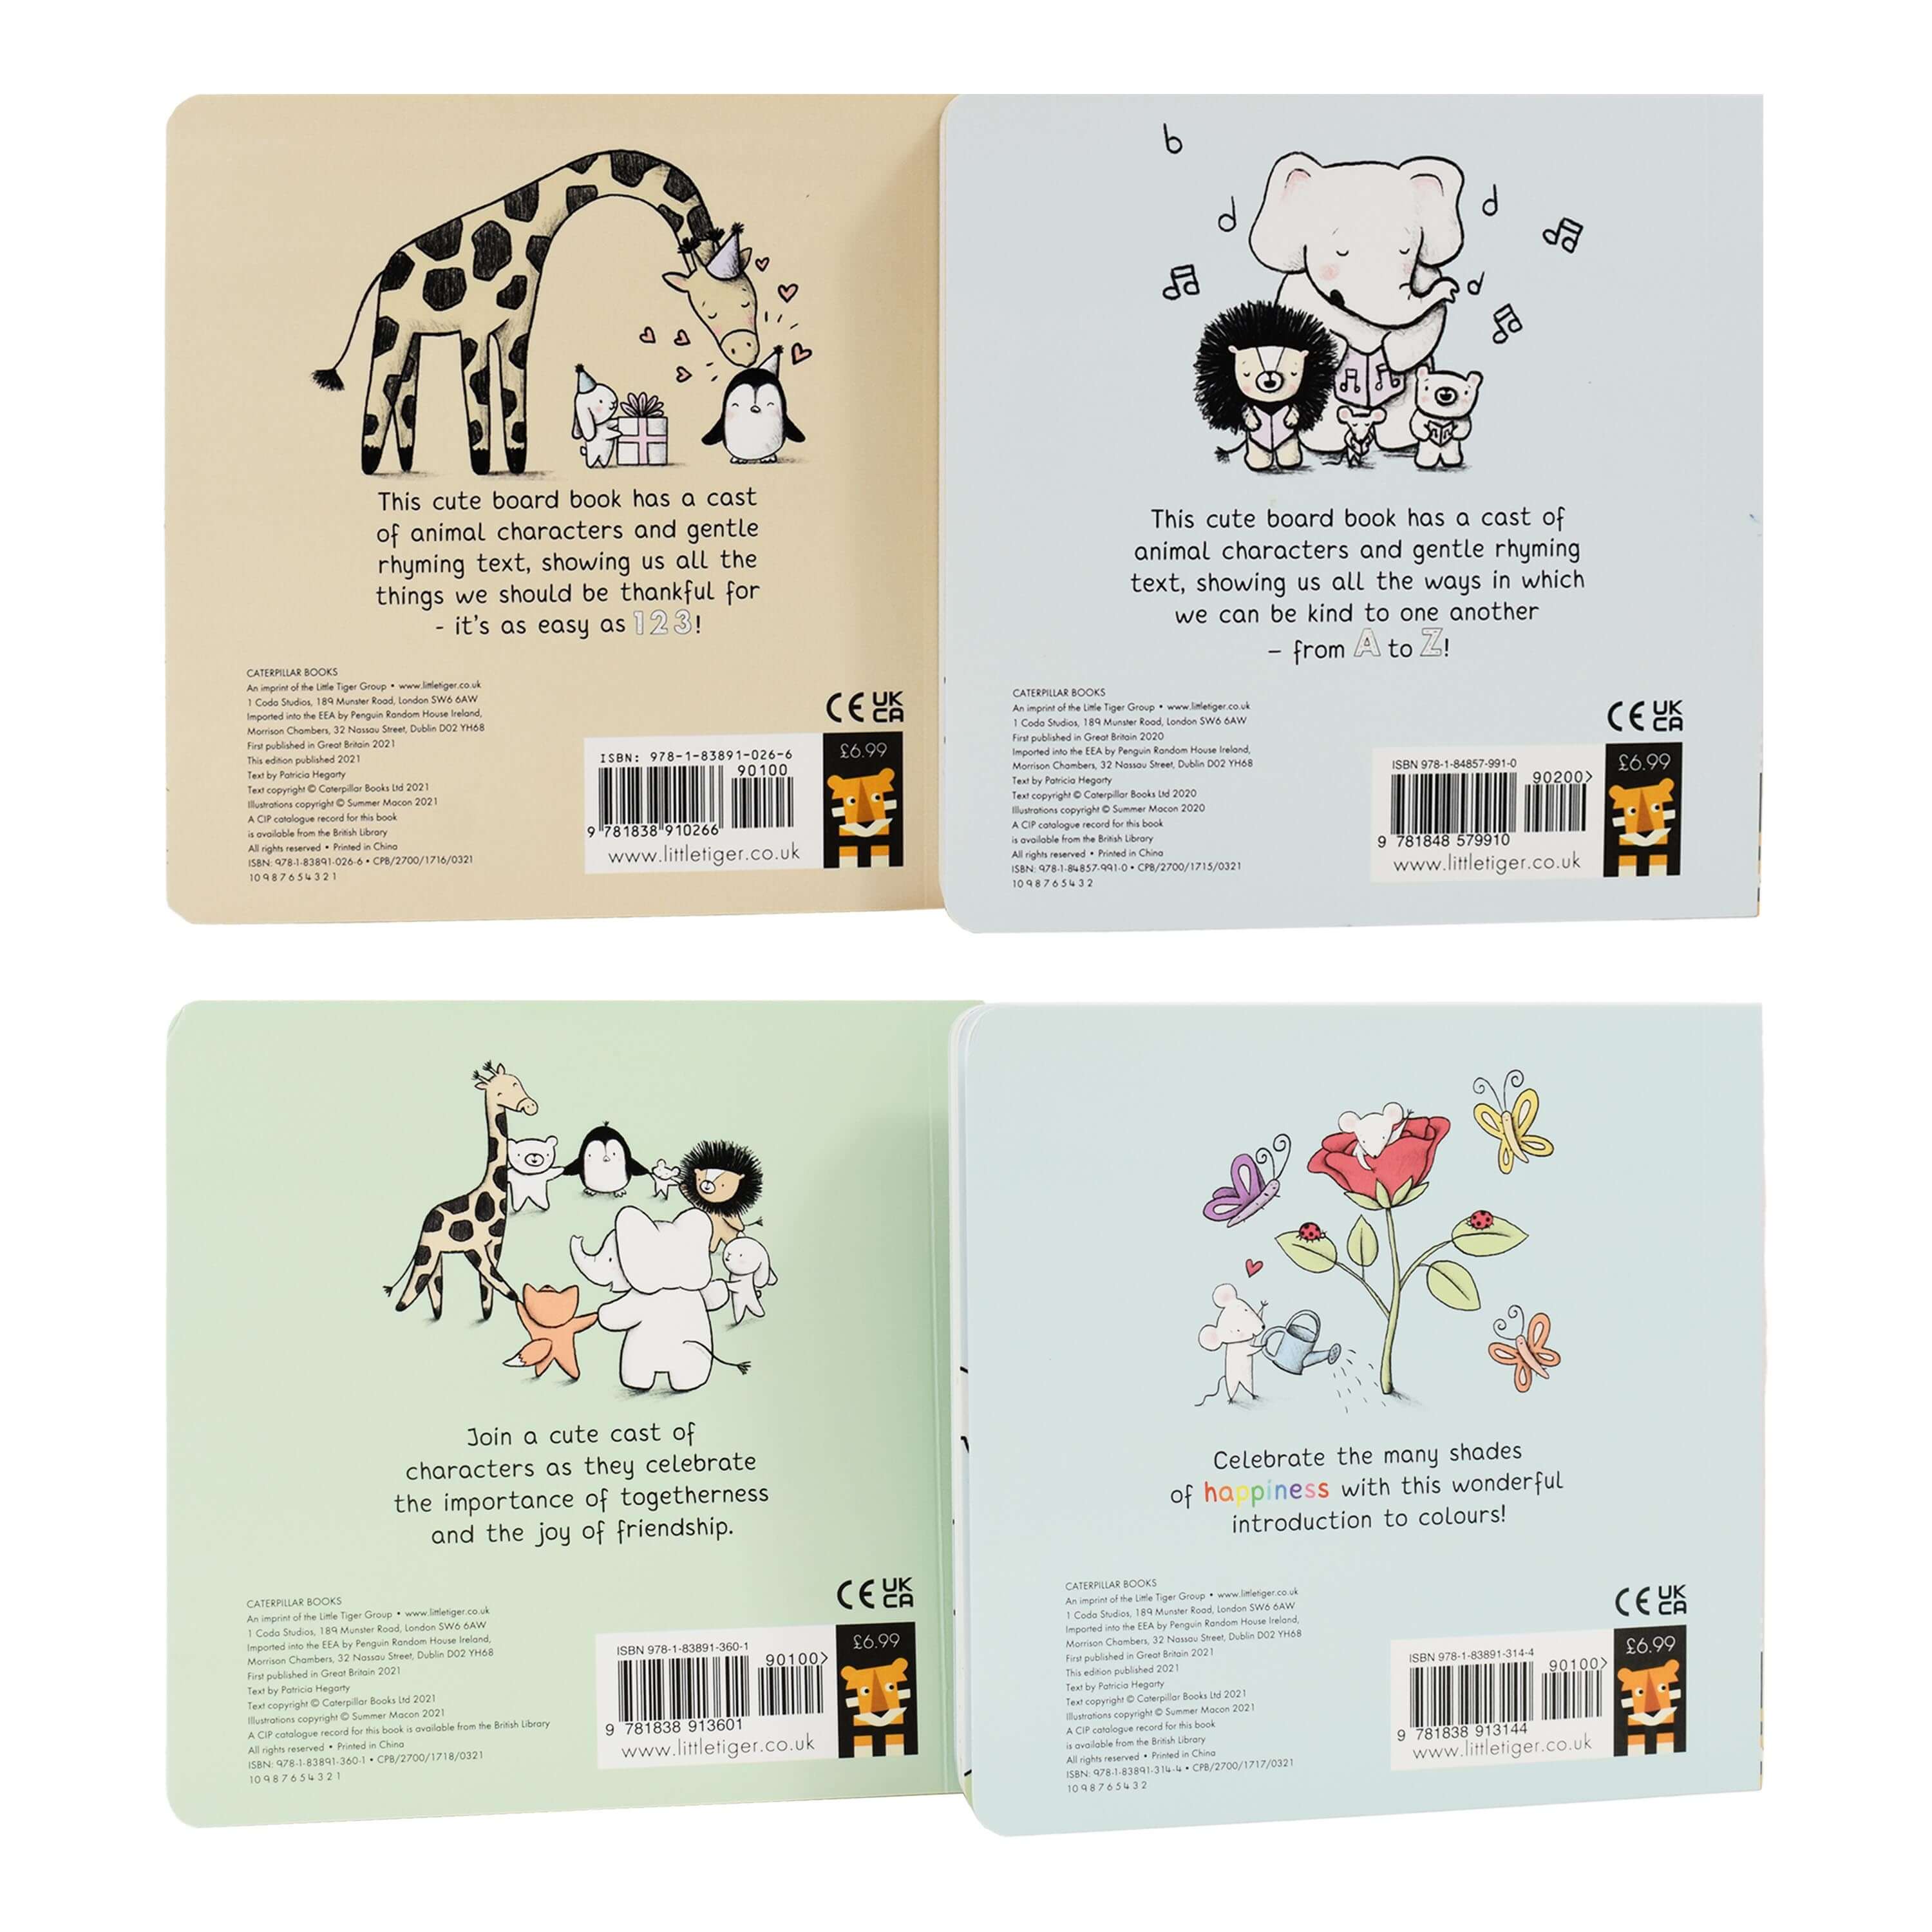 Age 0-5 - My First Books Of Happiness 4 Books Collection Box Set By Patricia Hegarty - Ages 0-5 - Hardback